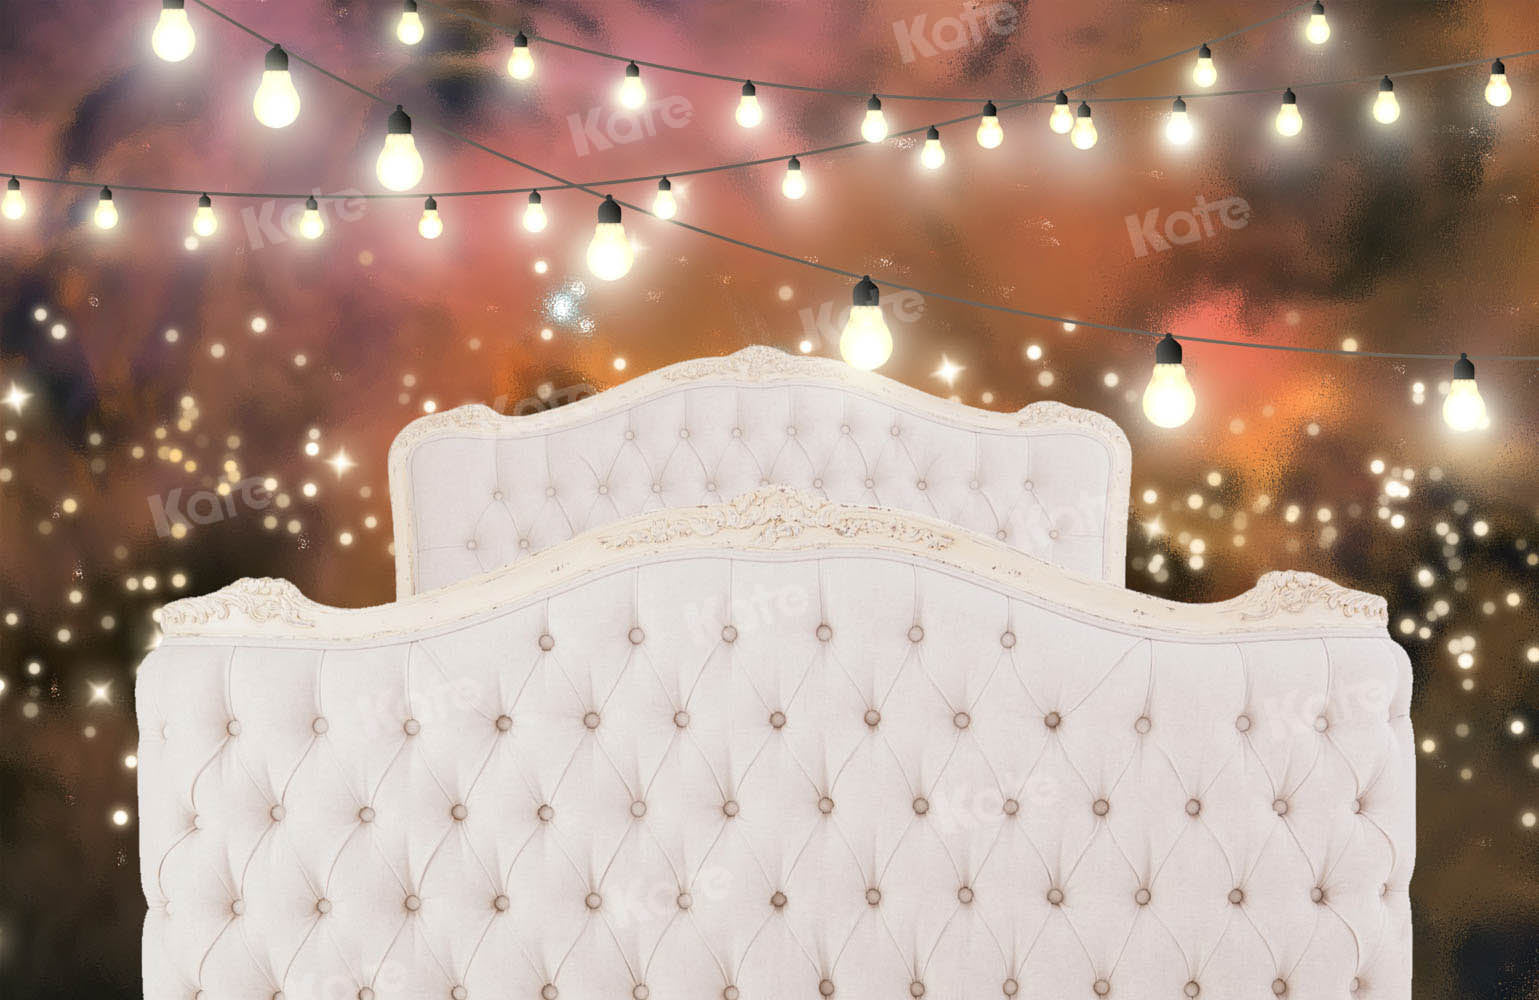 Kate Headboard Starry Sky Lights Background for Photography Designed by Chain Photography - Kate Backdrop